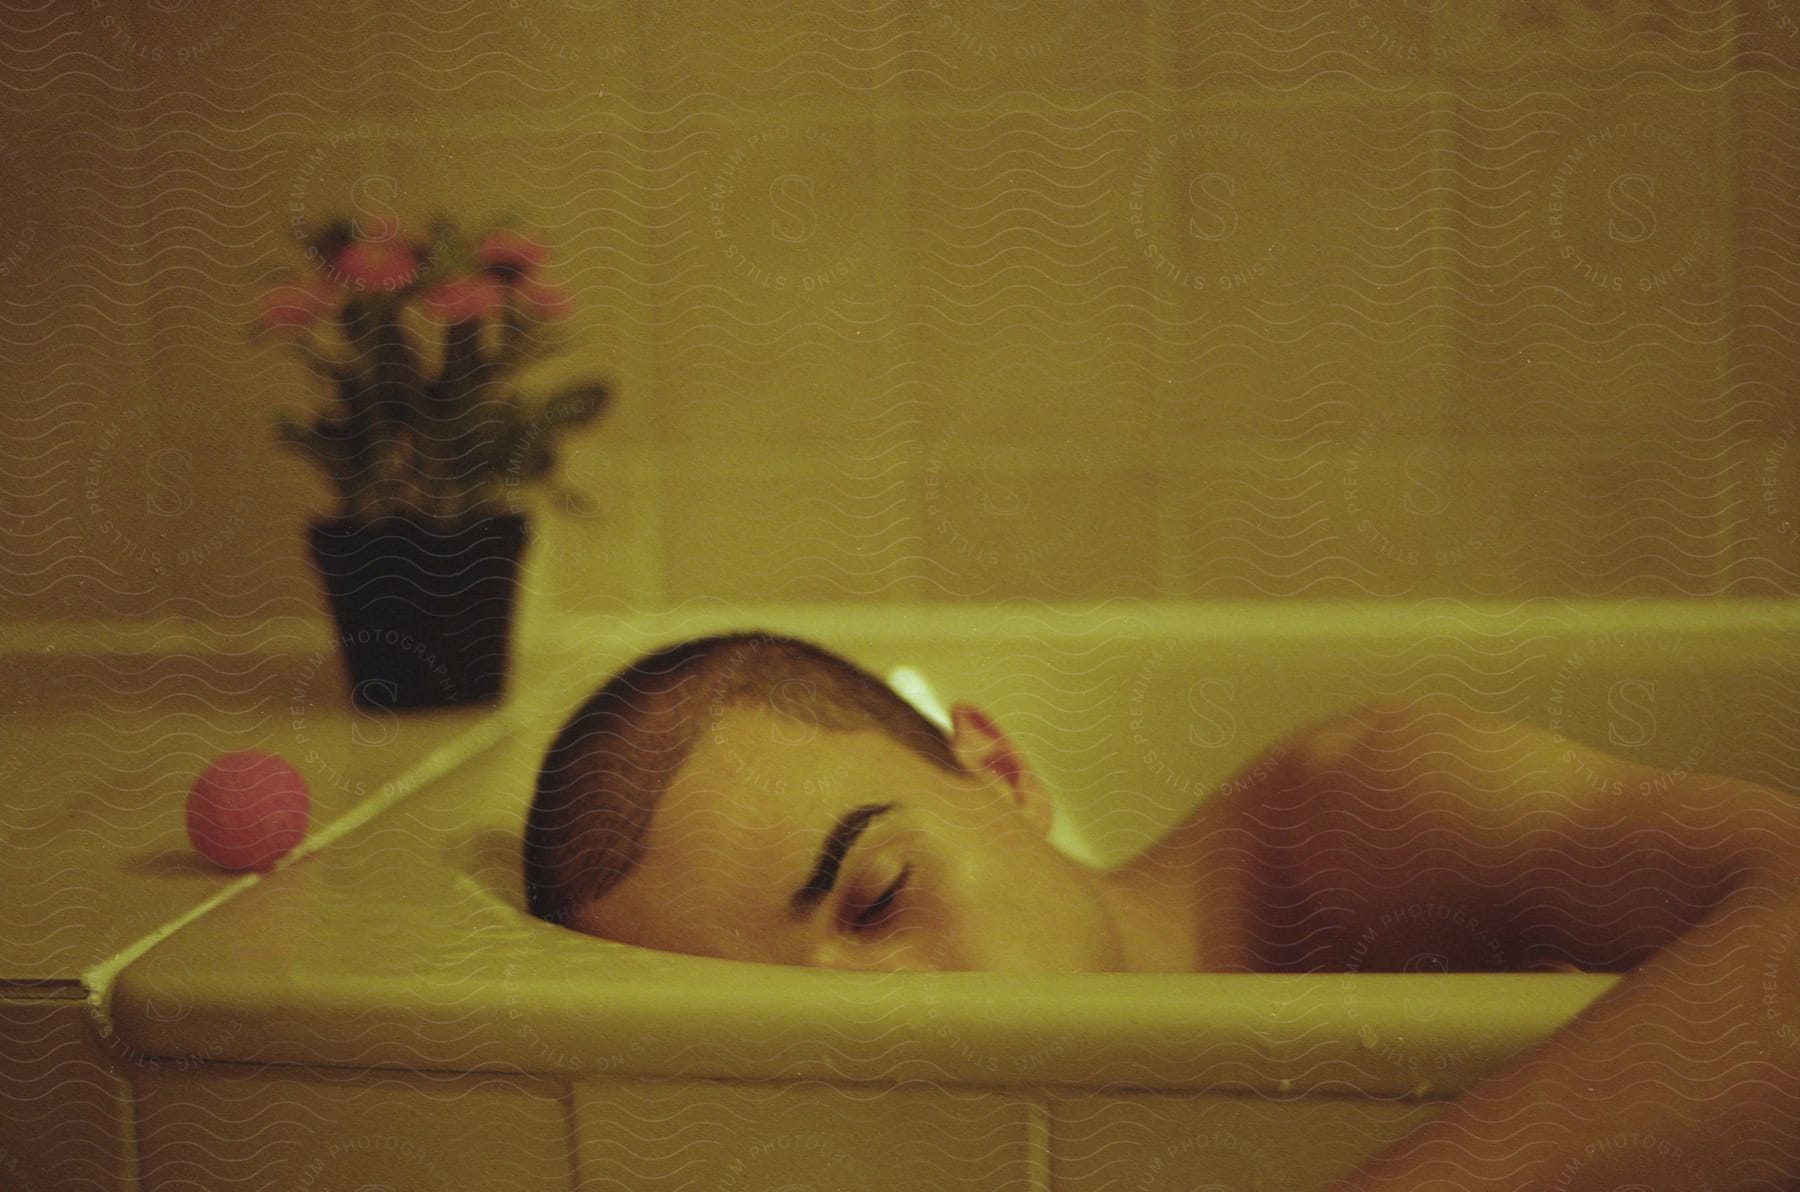 A man lying on his side in a bathtub with his arm over the side a ball and a plant nearby